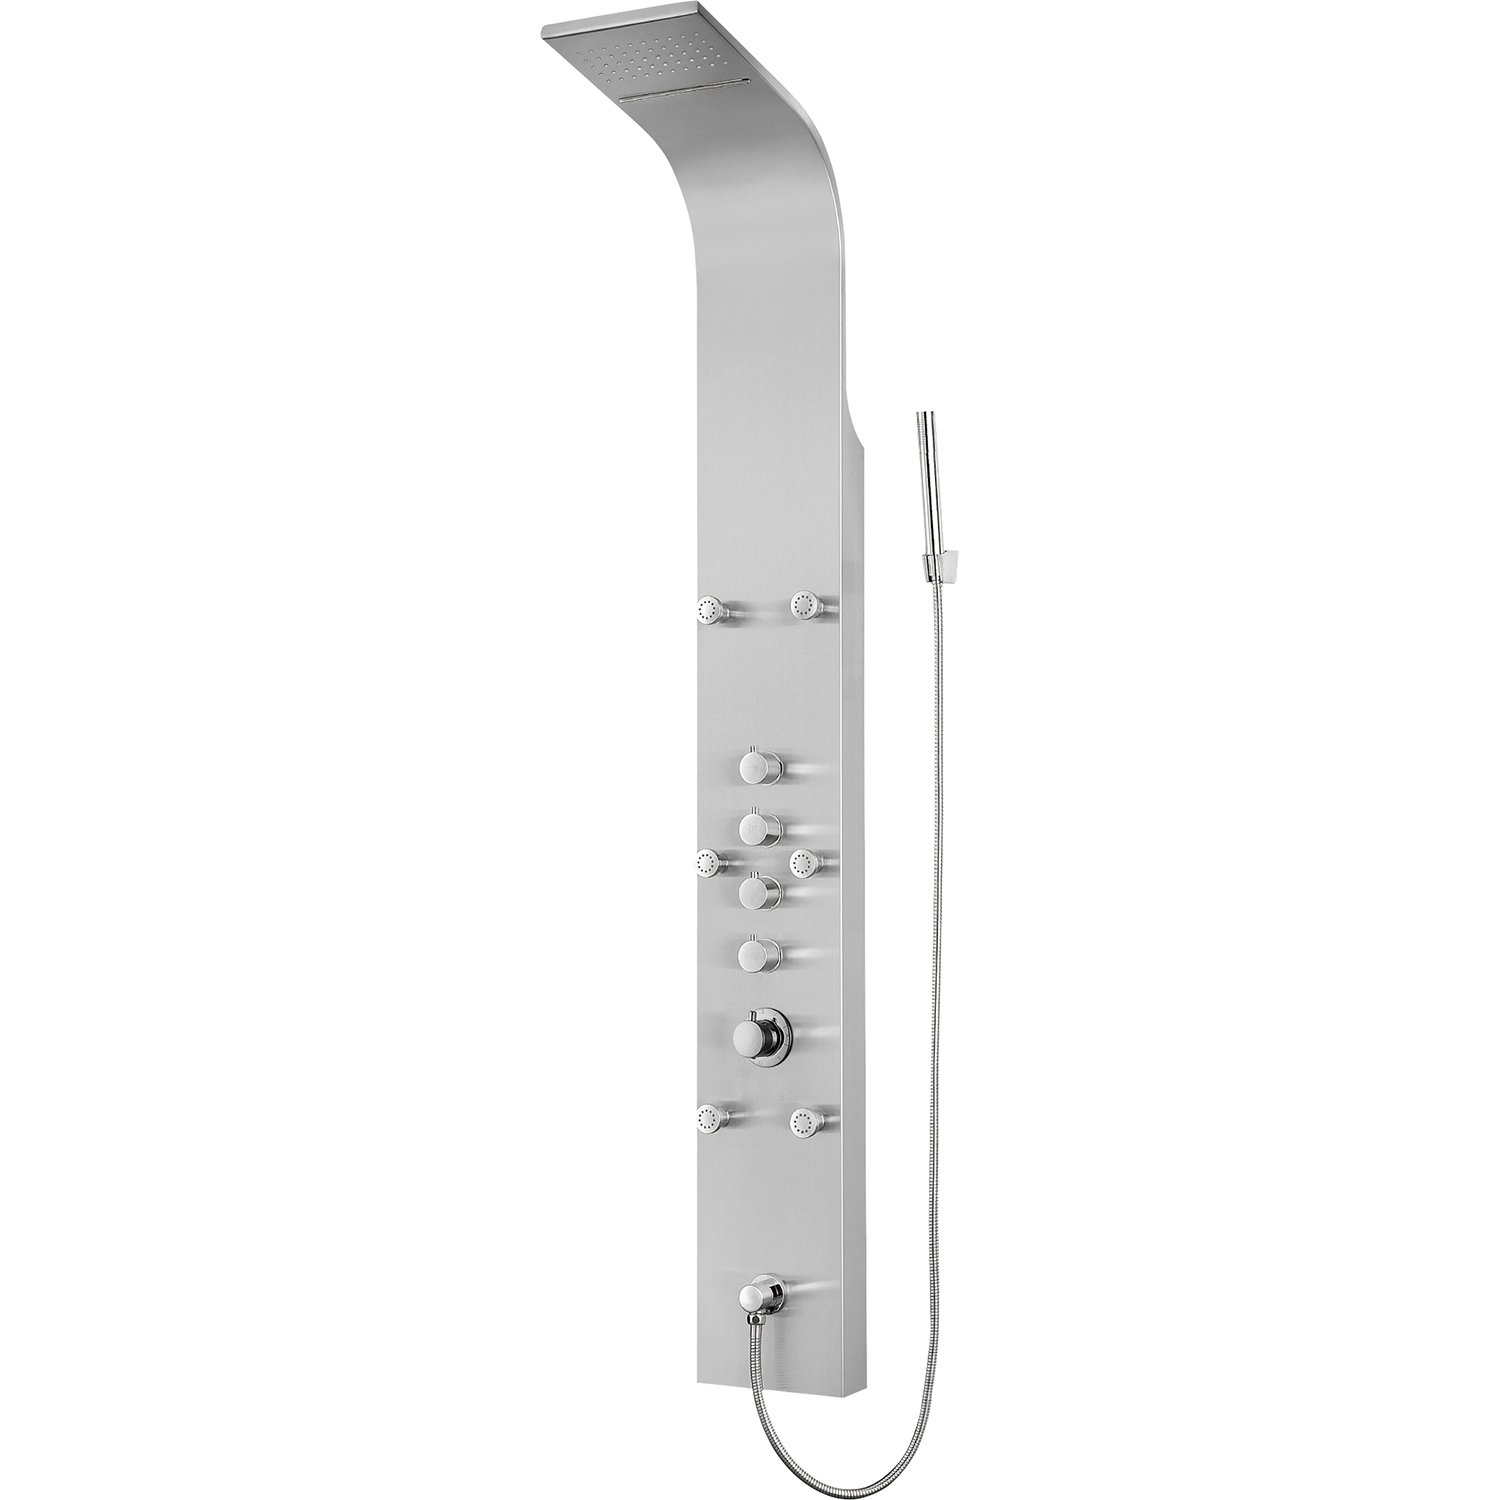 Blue Ocean 64.5” Stainless Steel SPS8879 Shower Panel with